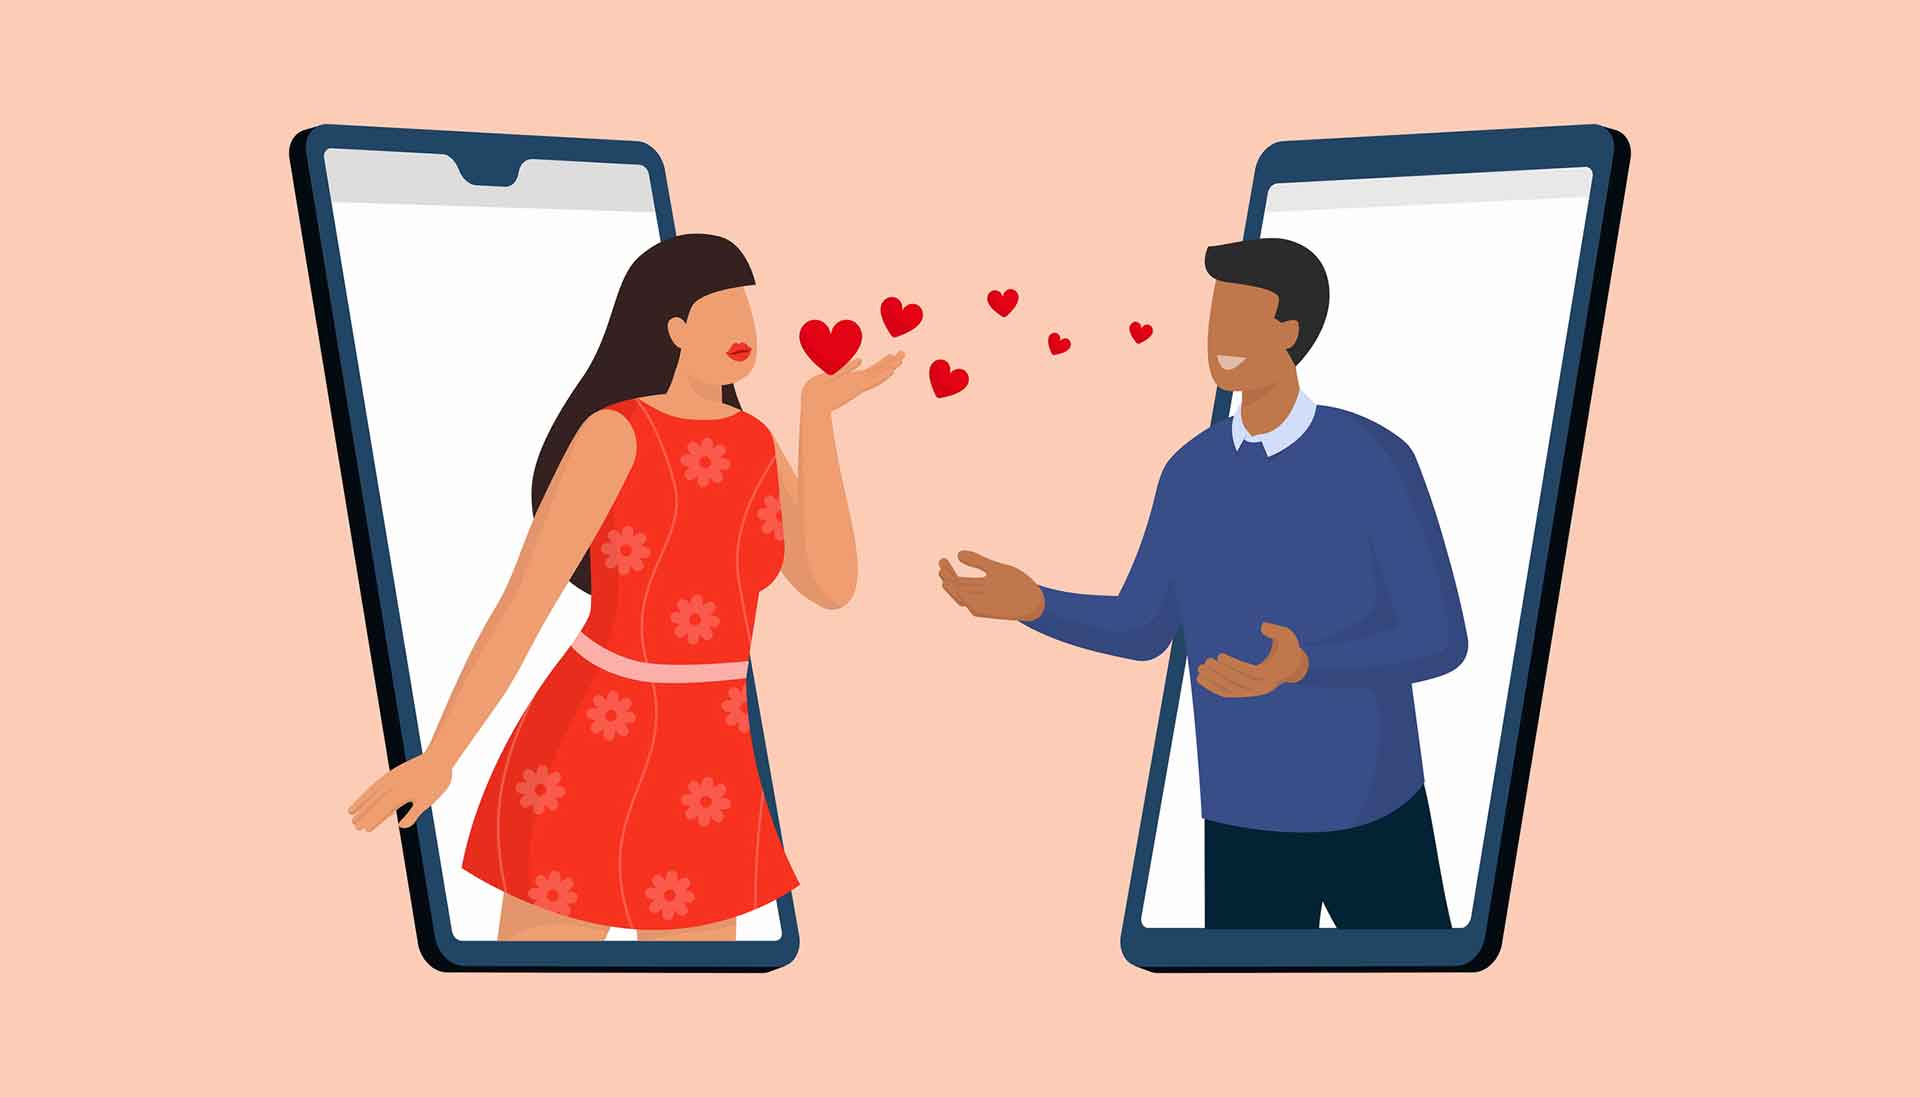 6 Simple Long Distance Couple Phone Tips to Stay Connected